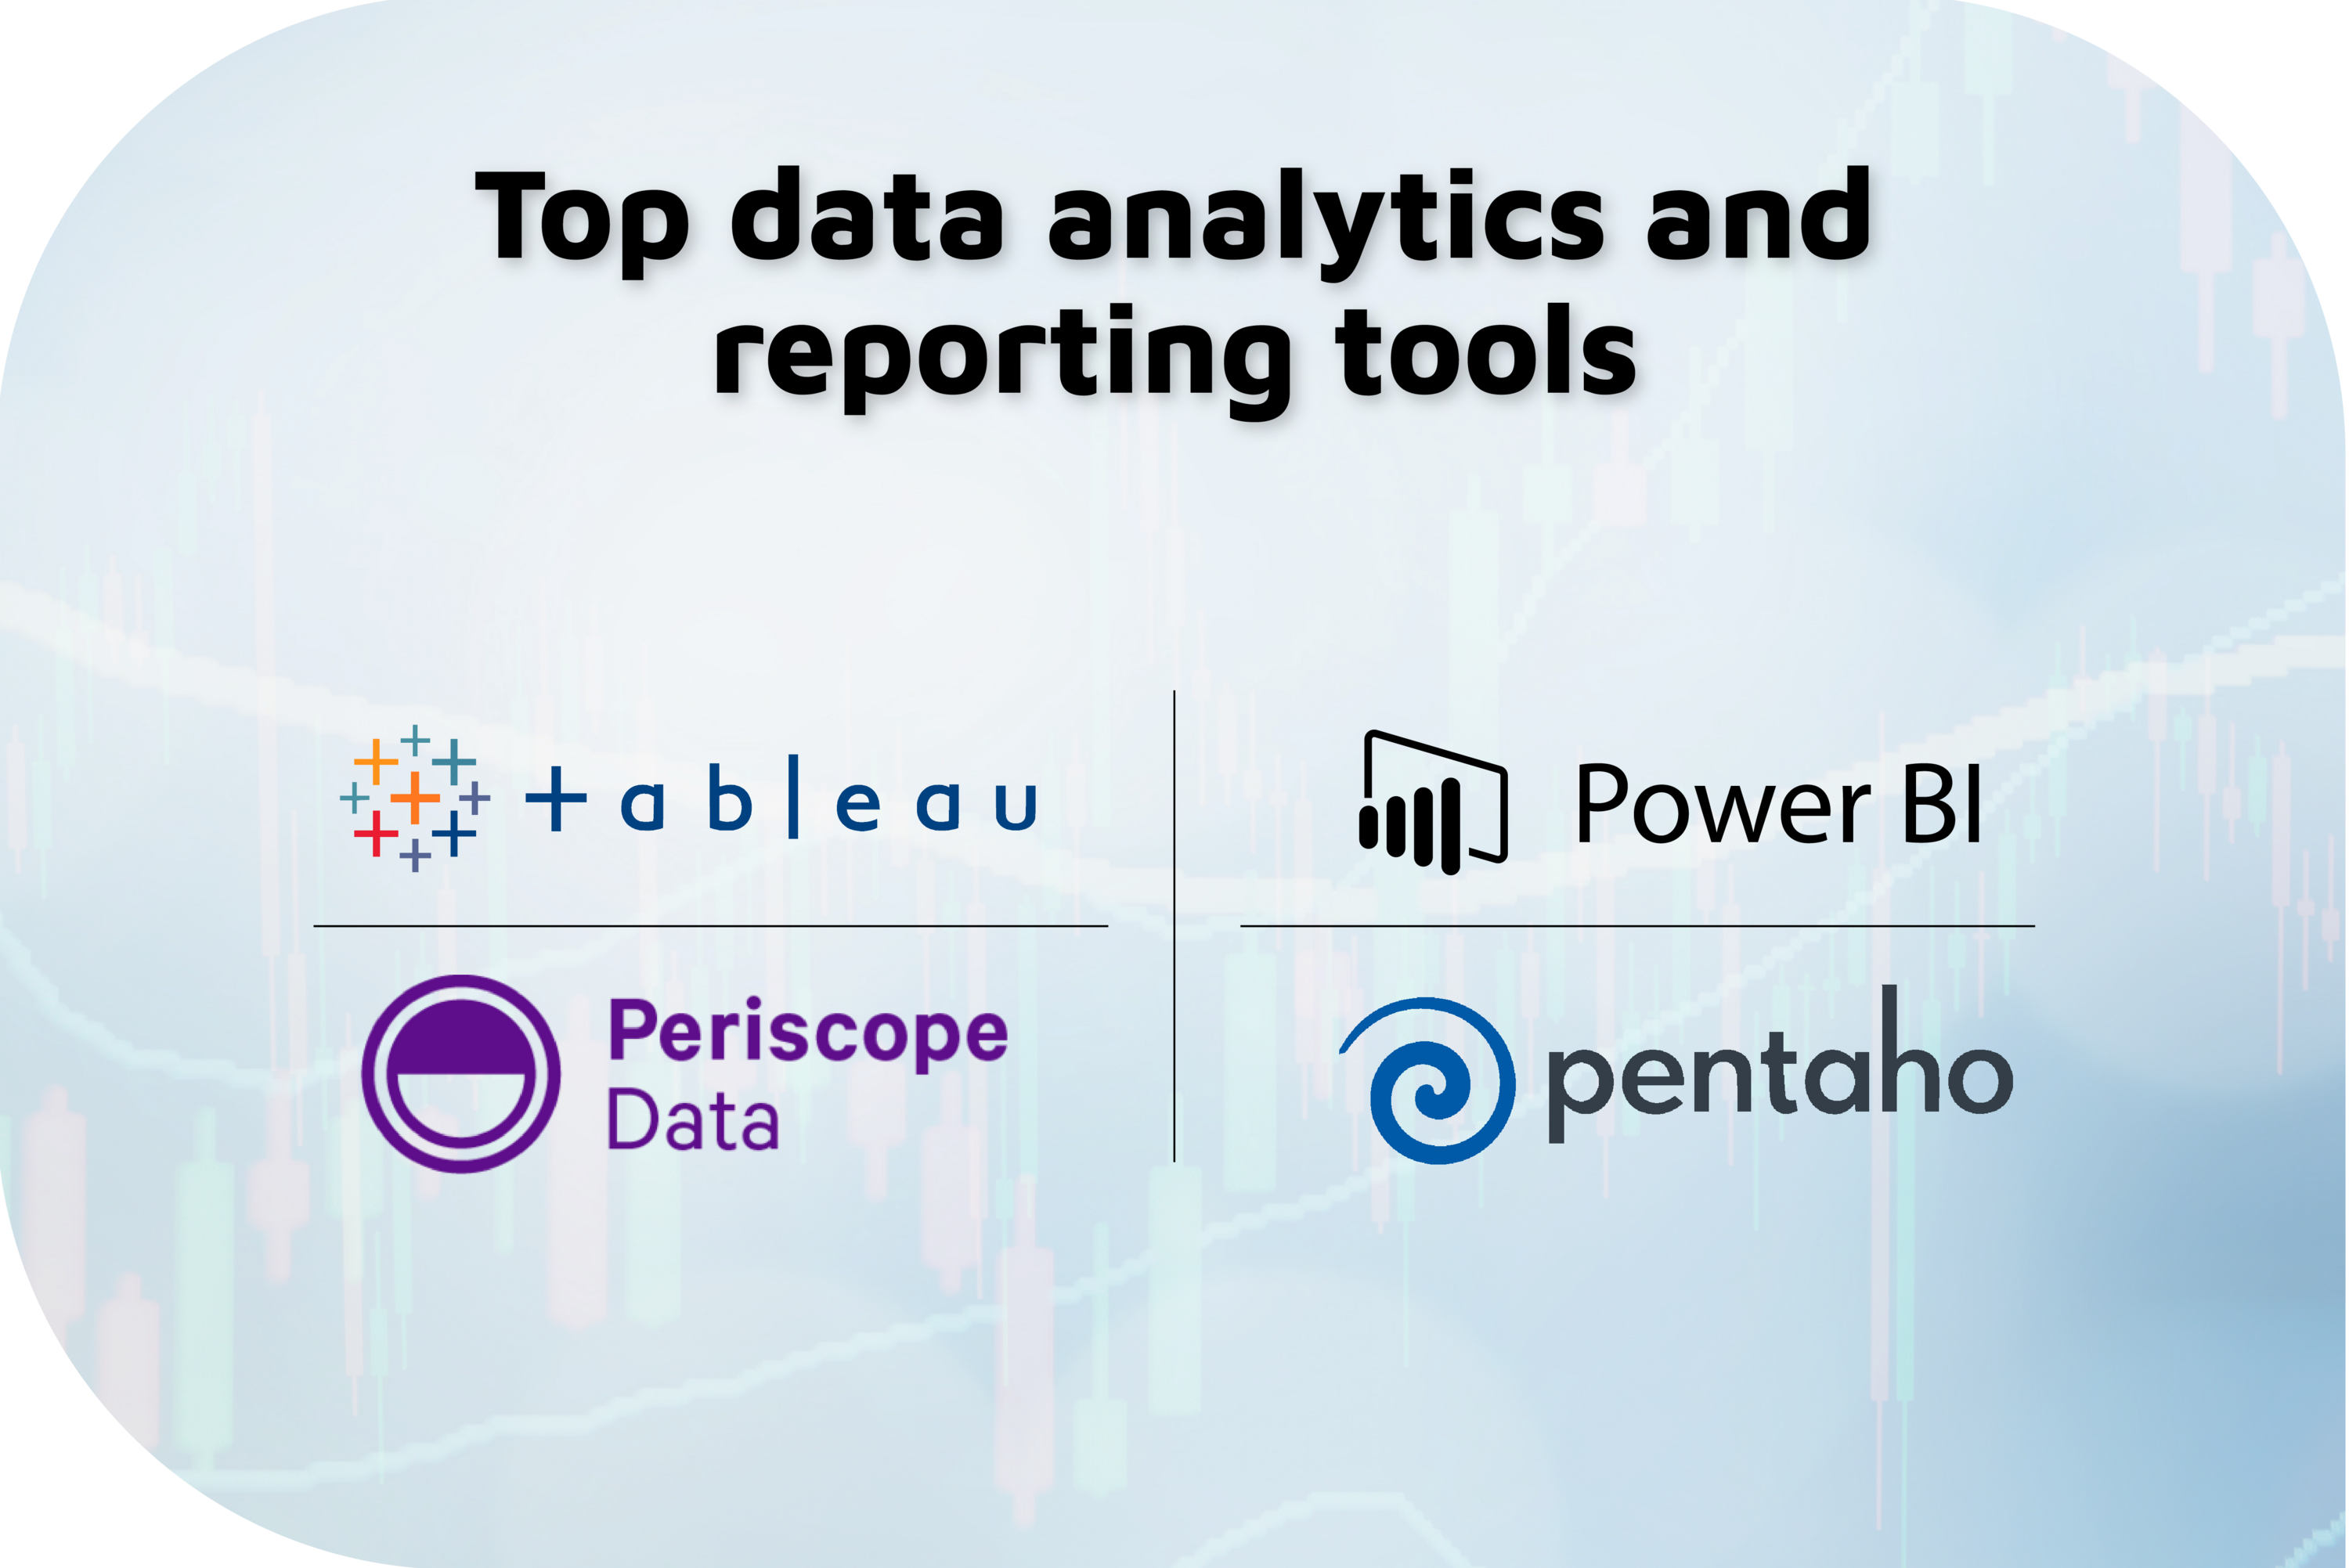 Popular data analytics and reporting tools